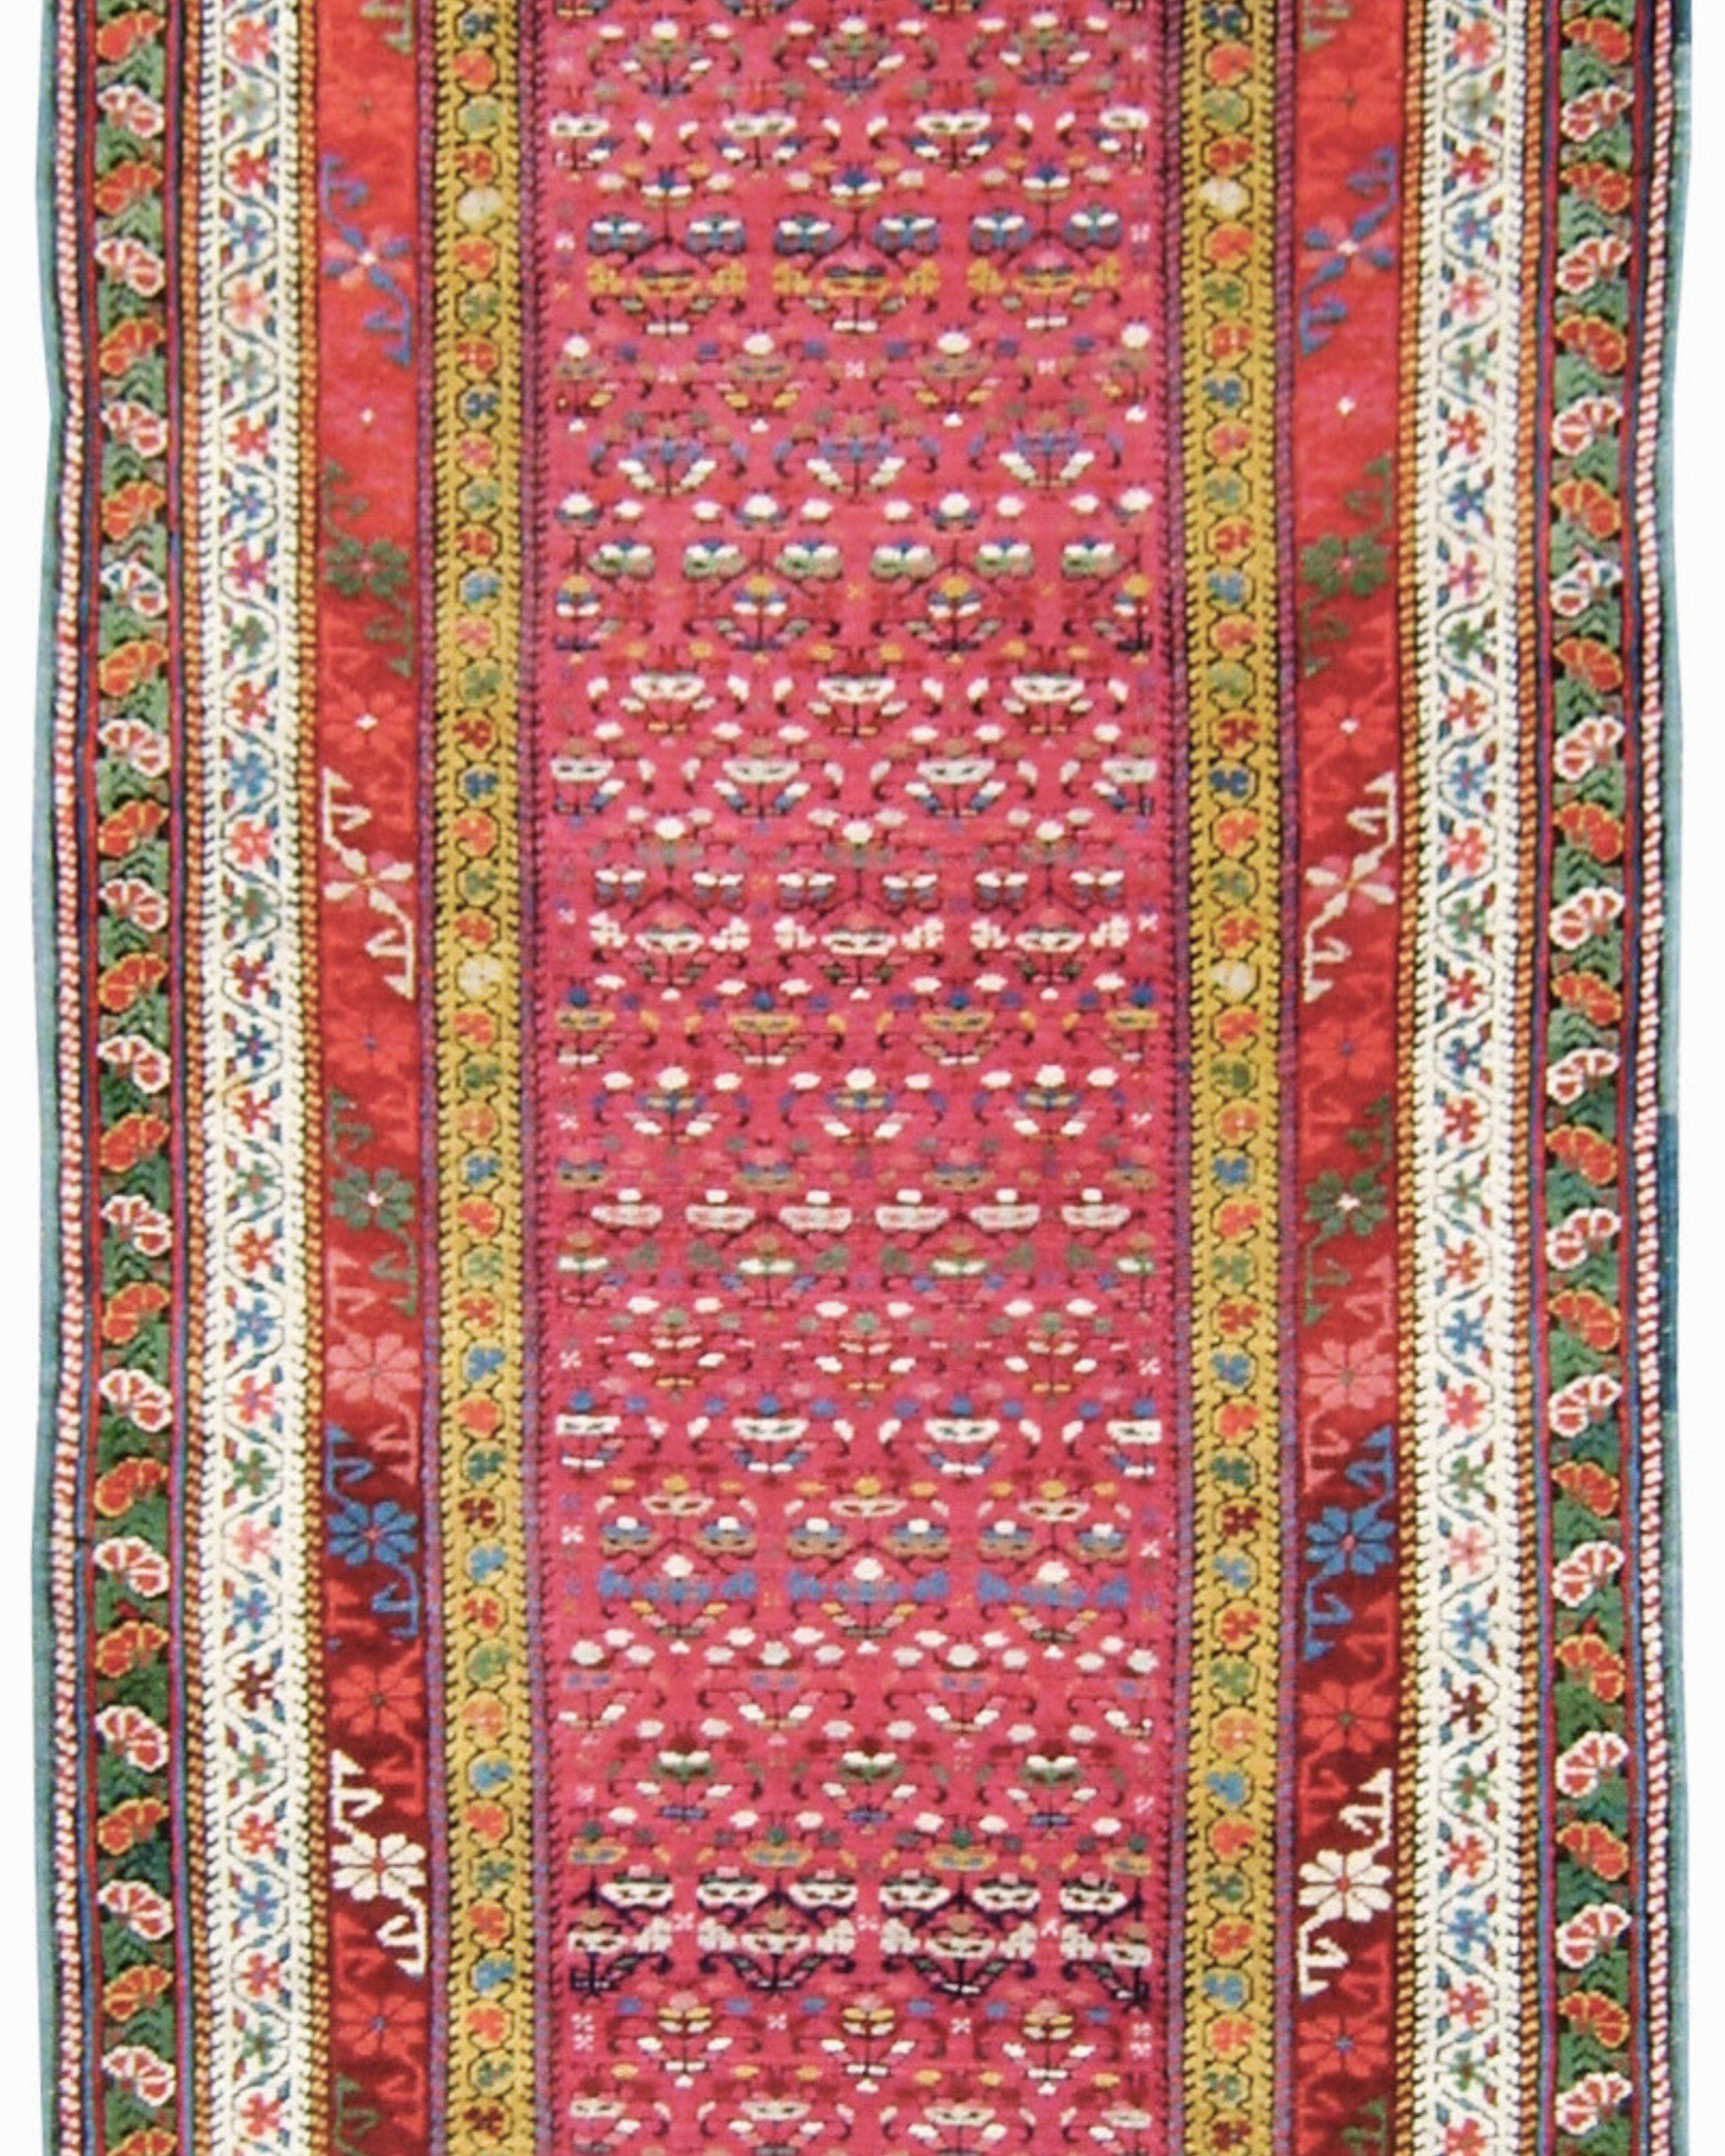 Antique Caucasian Kuba Runner, 19th Century In Excellent Condition For Sale In San Francisco, CA